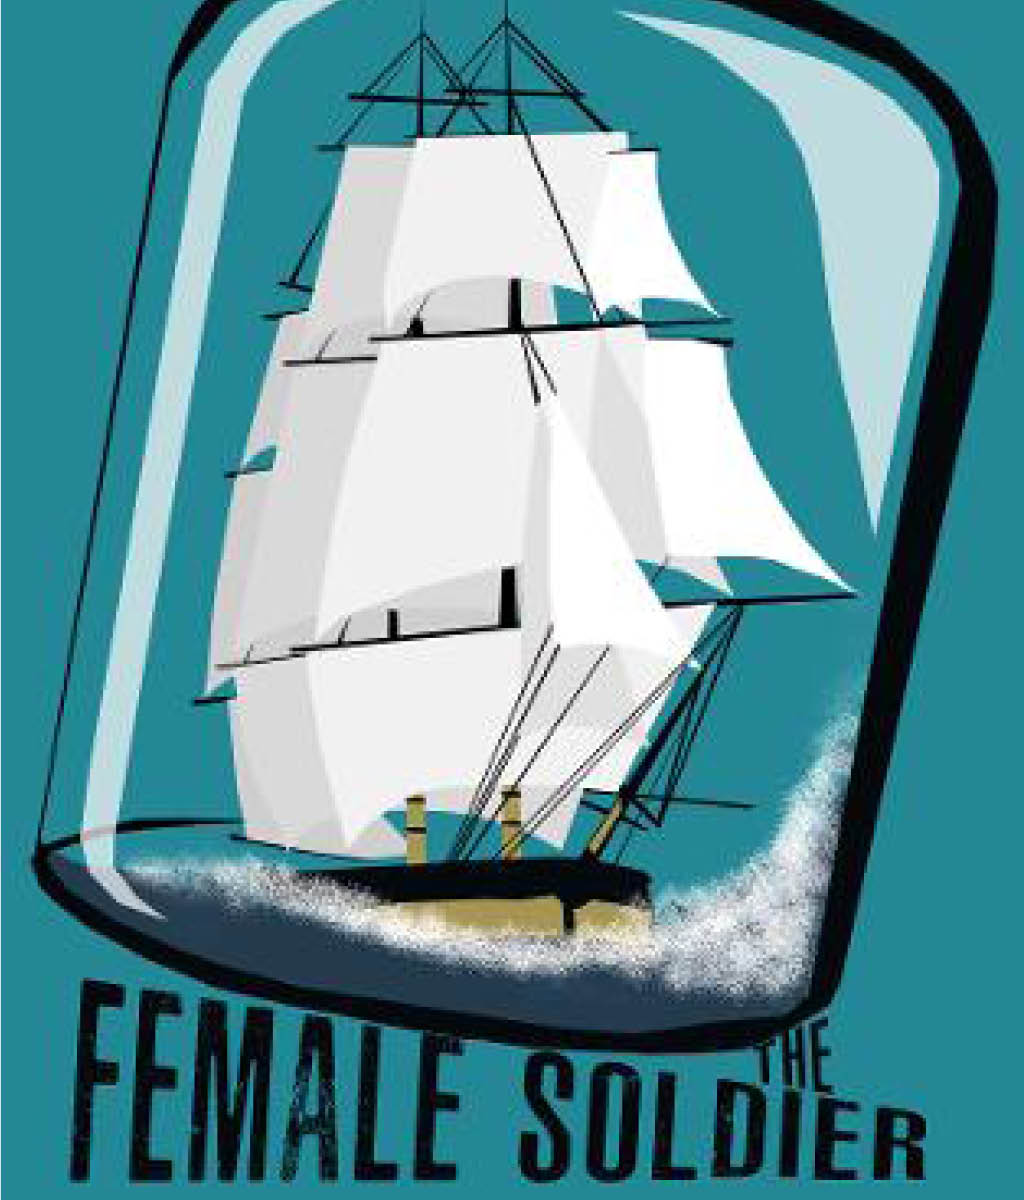 The Female Soldier by Hannah Snell &amp; Robert Walker